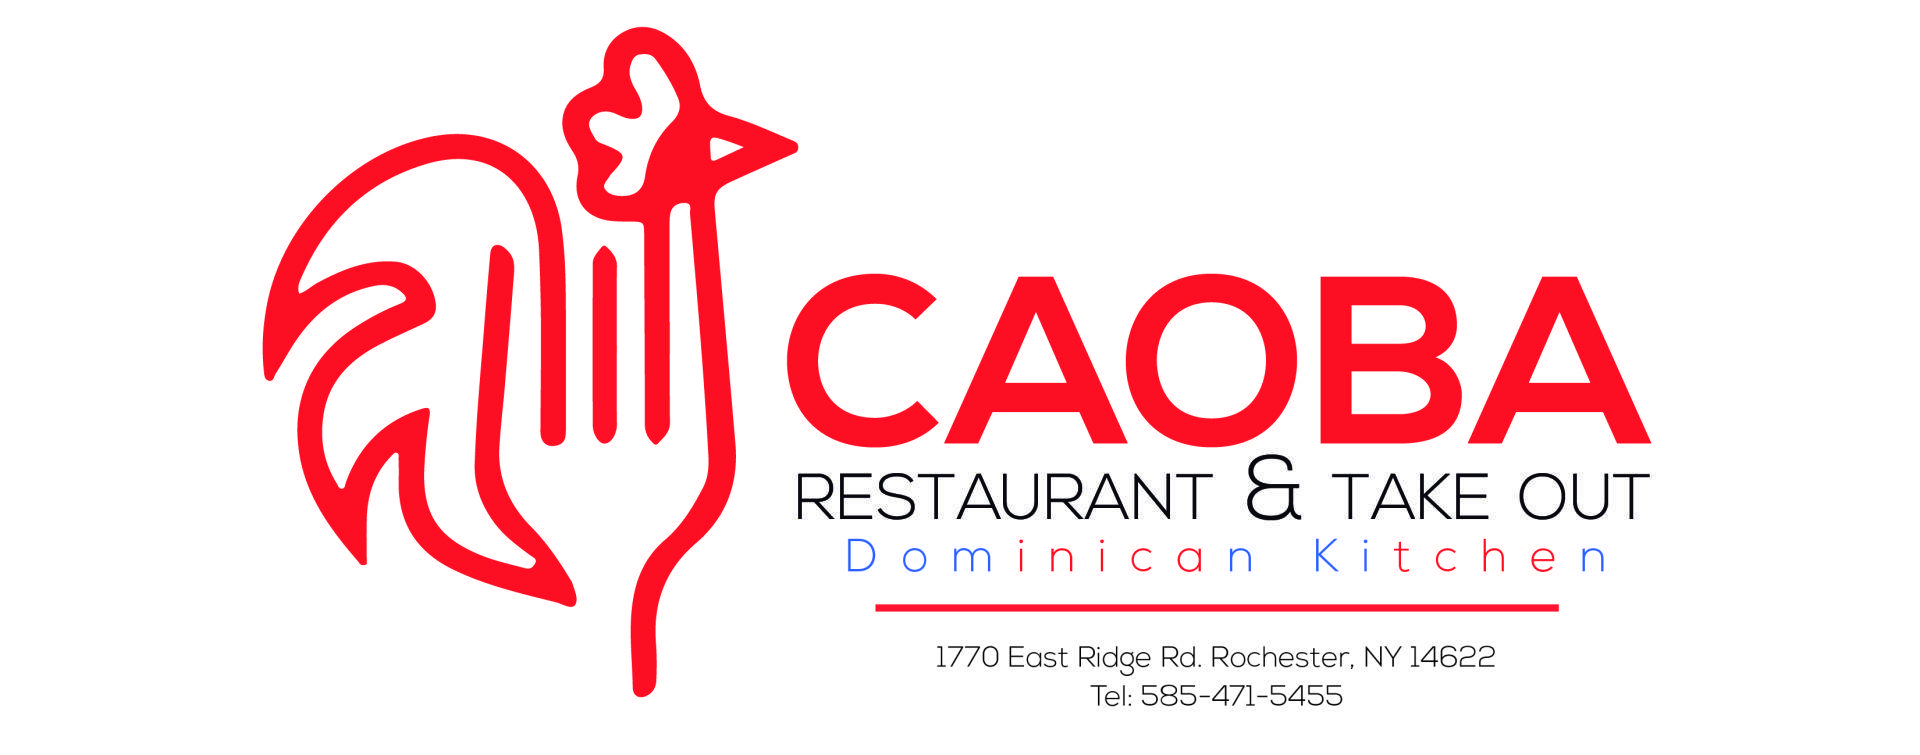 Domnican Restarant Logo - CAOBA RESTAURANT & TAKE OUT – DOMINICAN KITCHEN